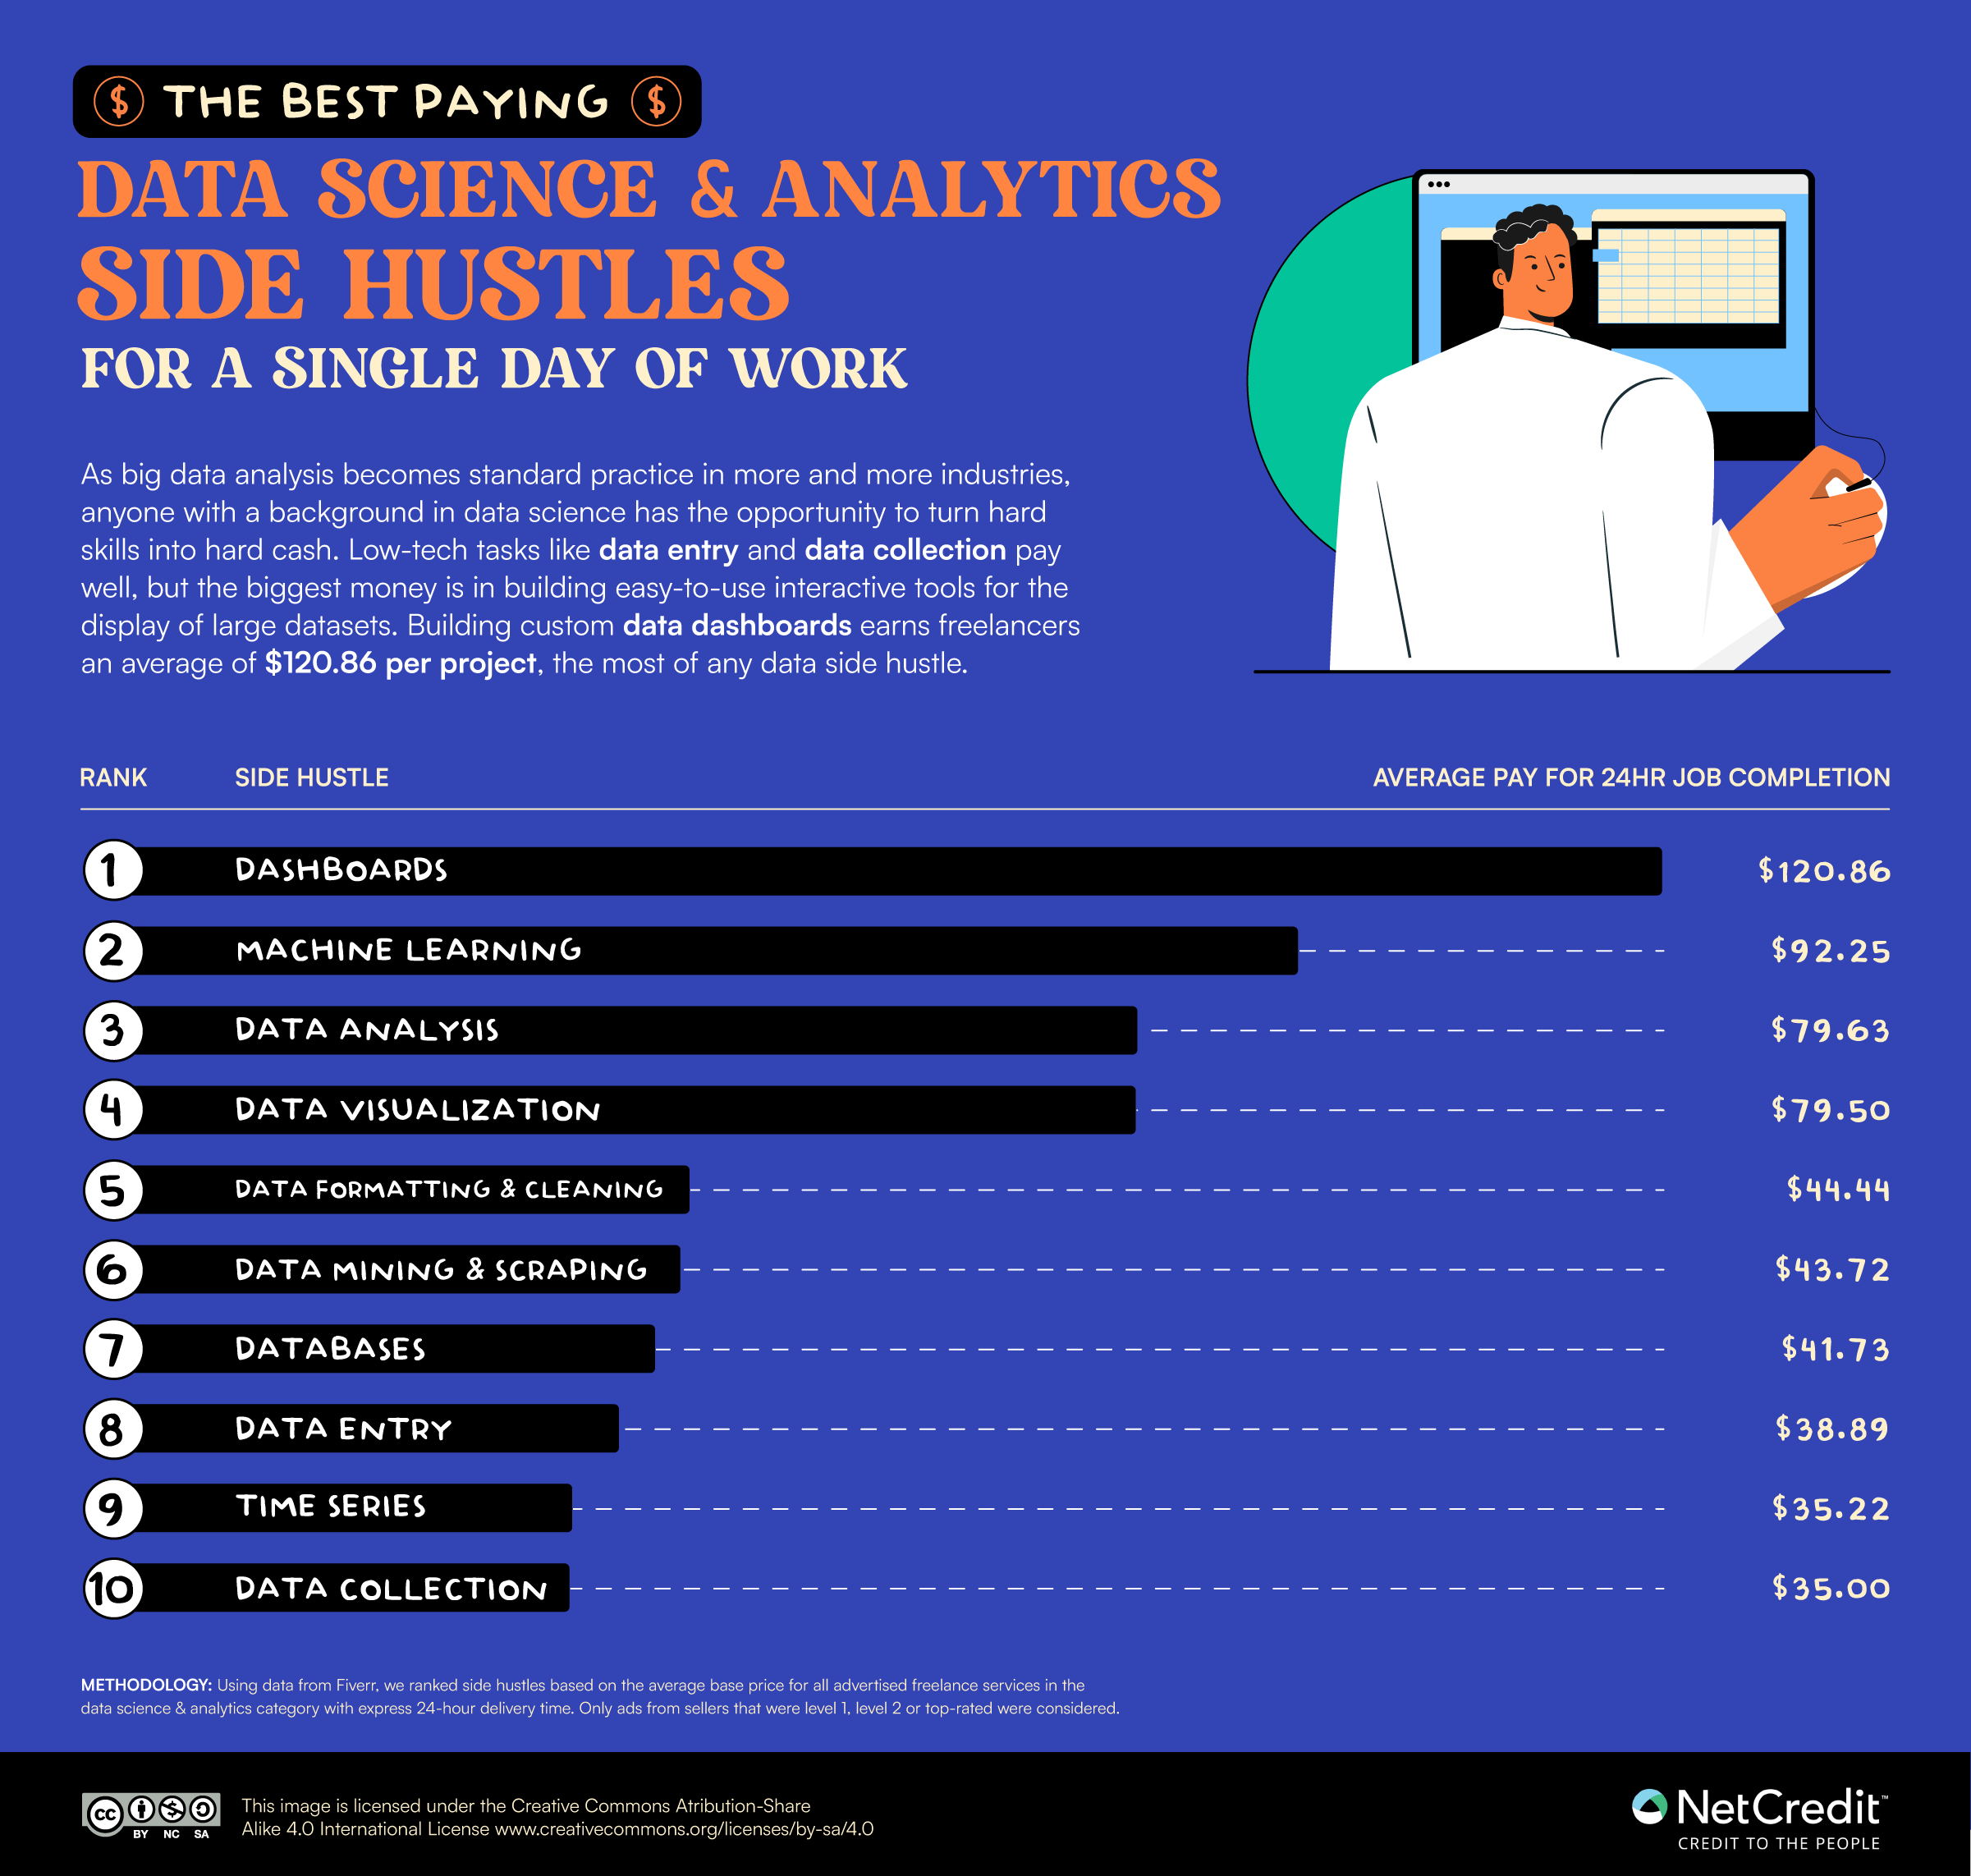 Ranking of the best paying data and analytics side hustles